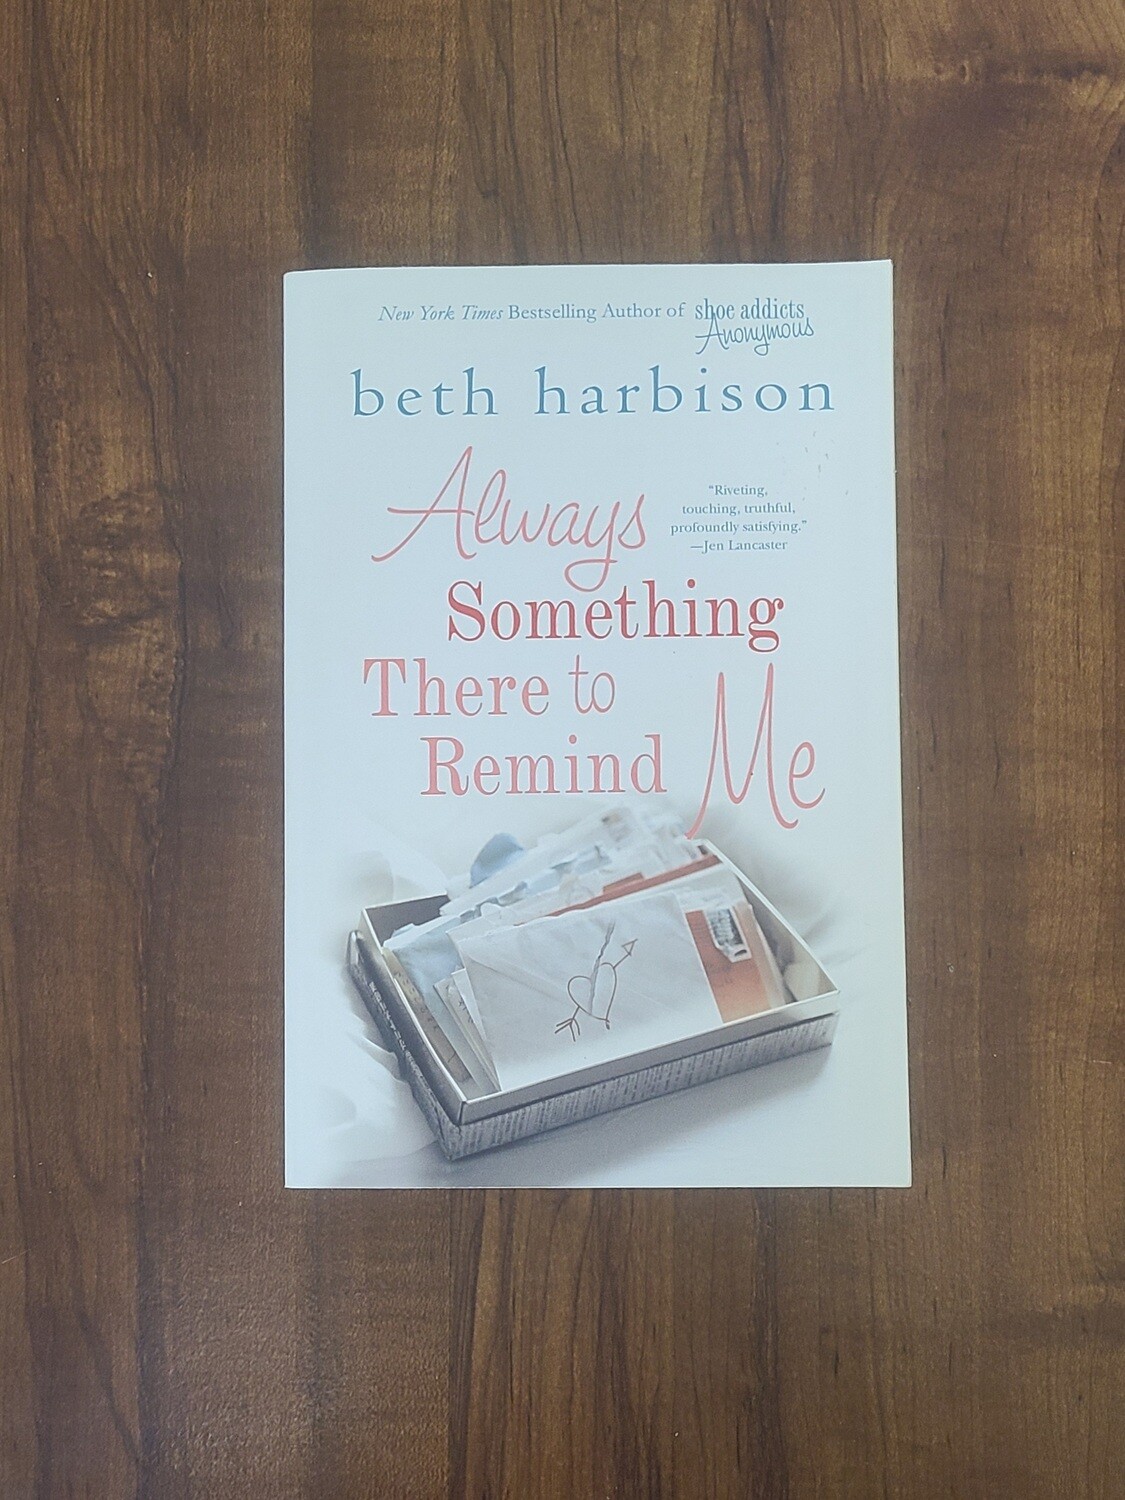 Always Something There to Remind Me by Beth Harbison